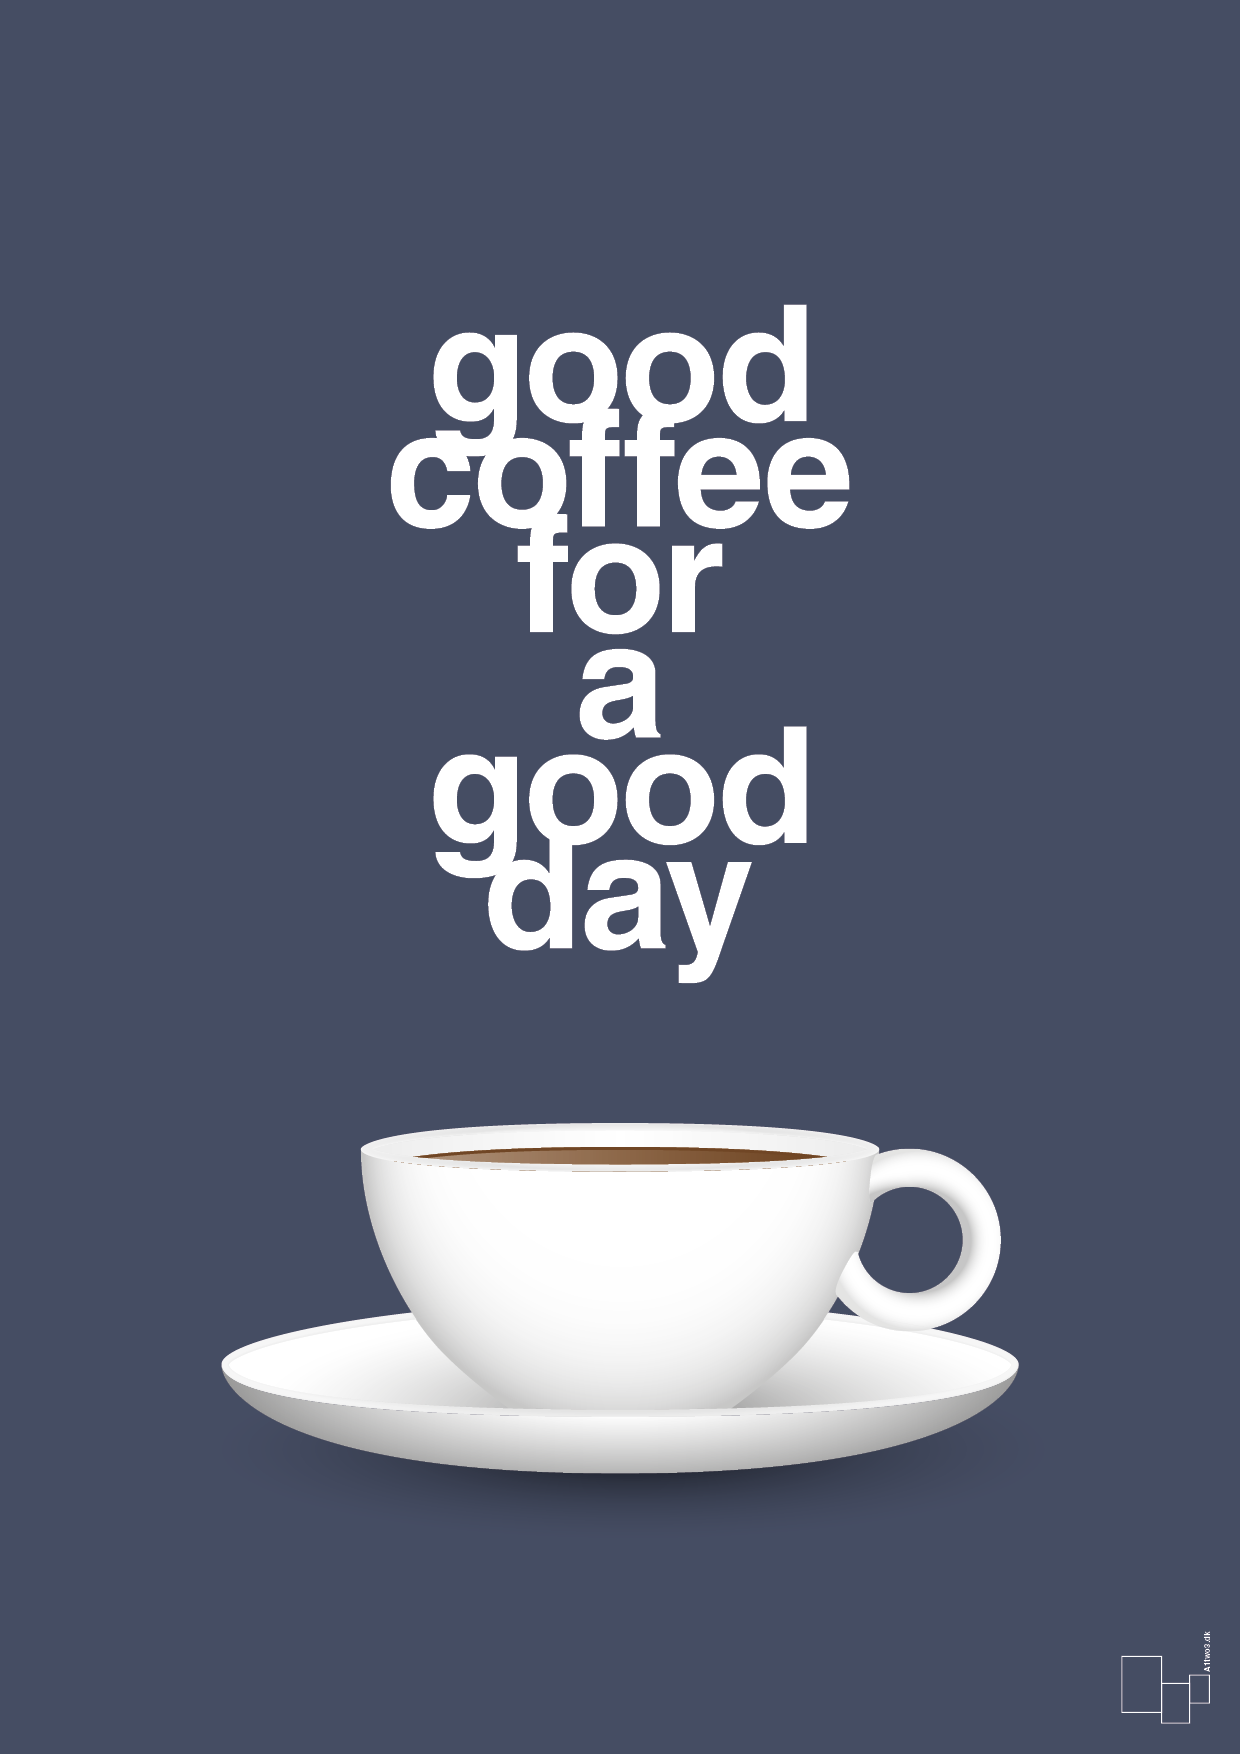 good coffee for a good day - Plakat med Mad & Drikke i Petrol